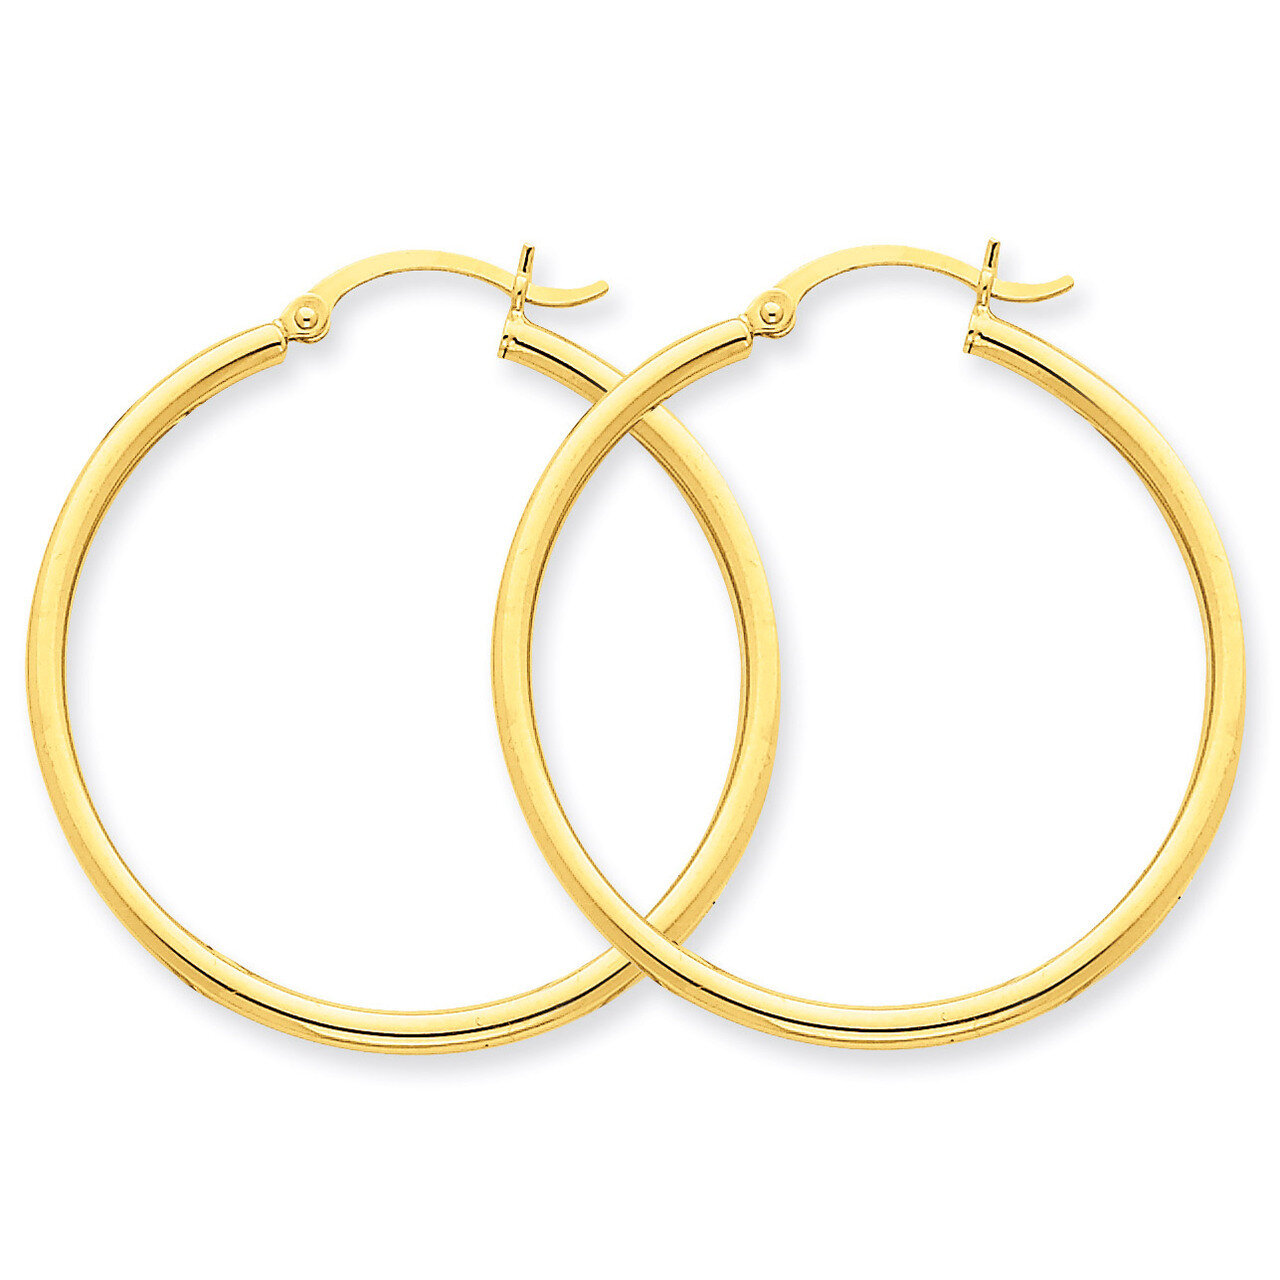 Polished 2mm Round Hoop Earrings 10k Gold 10T913